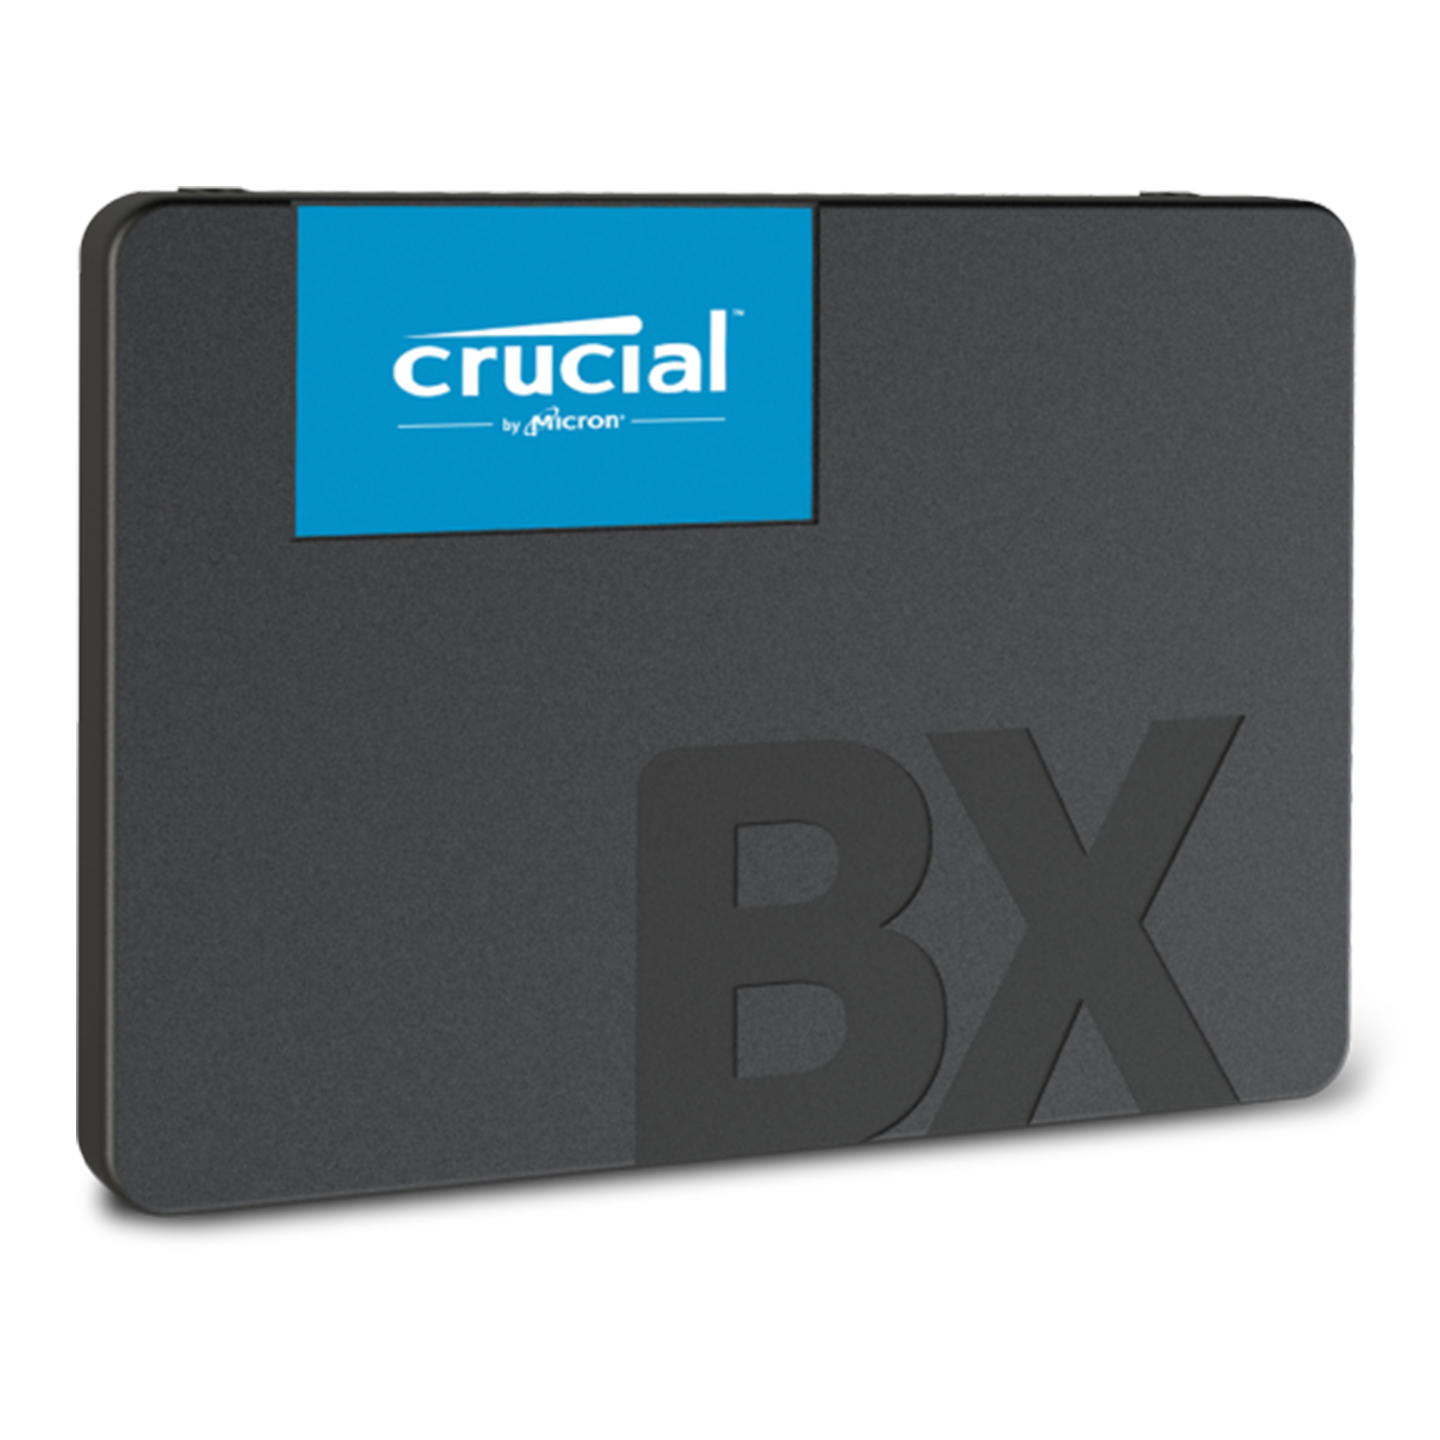 Crucial CT1000BX500SSD1 1TB BX500 1000GB 2.5 inch SSD (Solid State Disk)